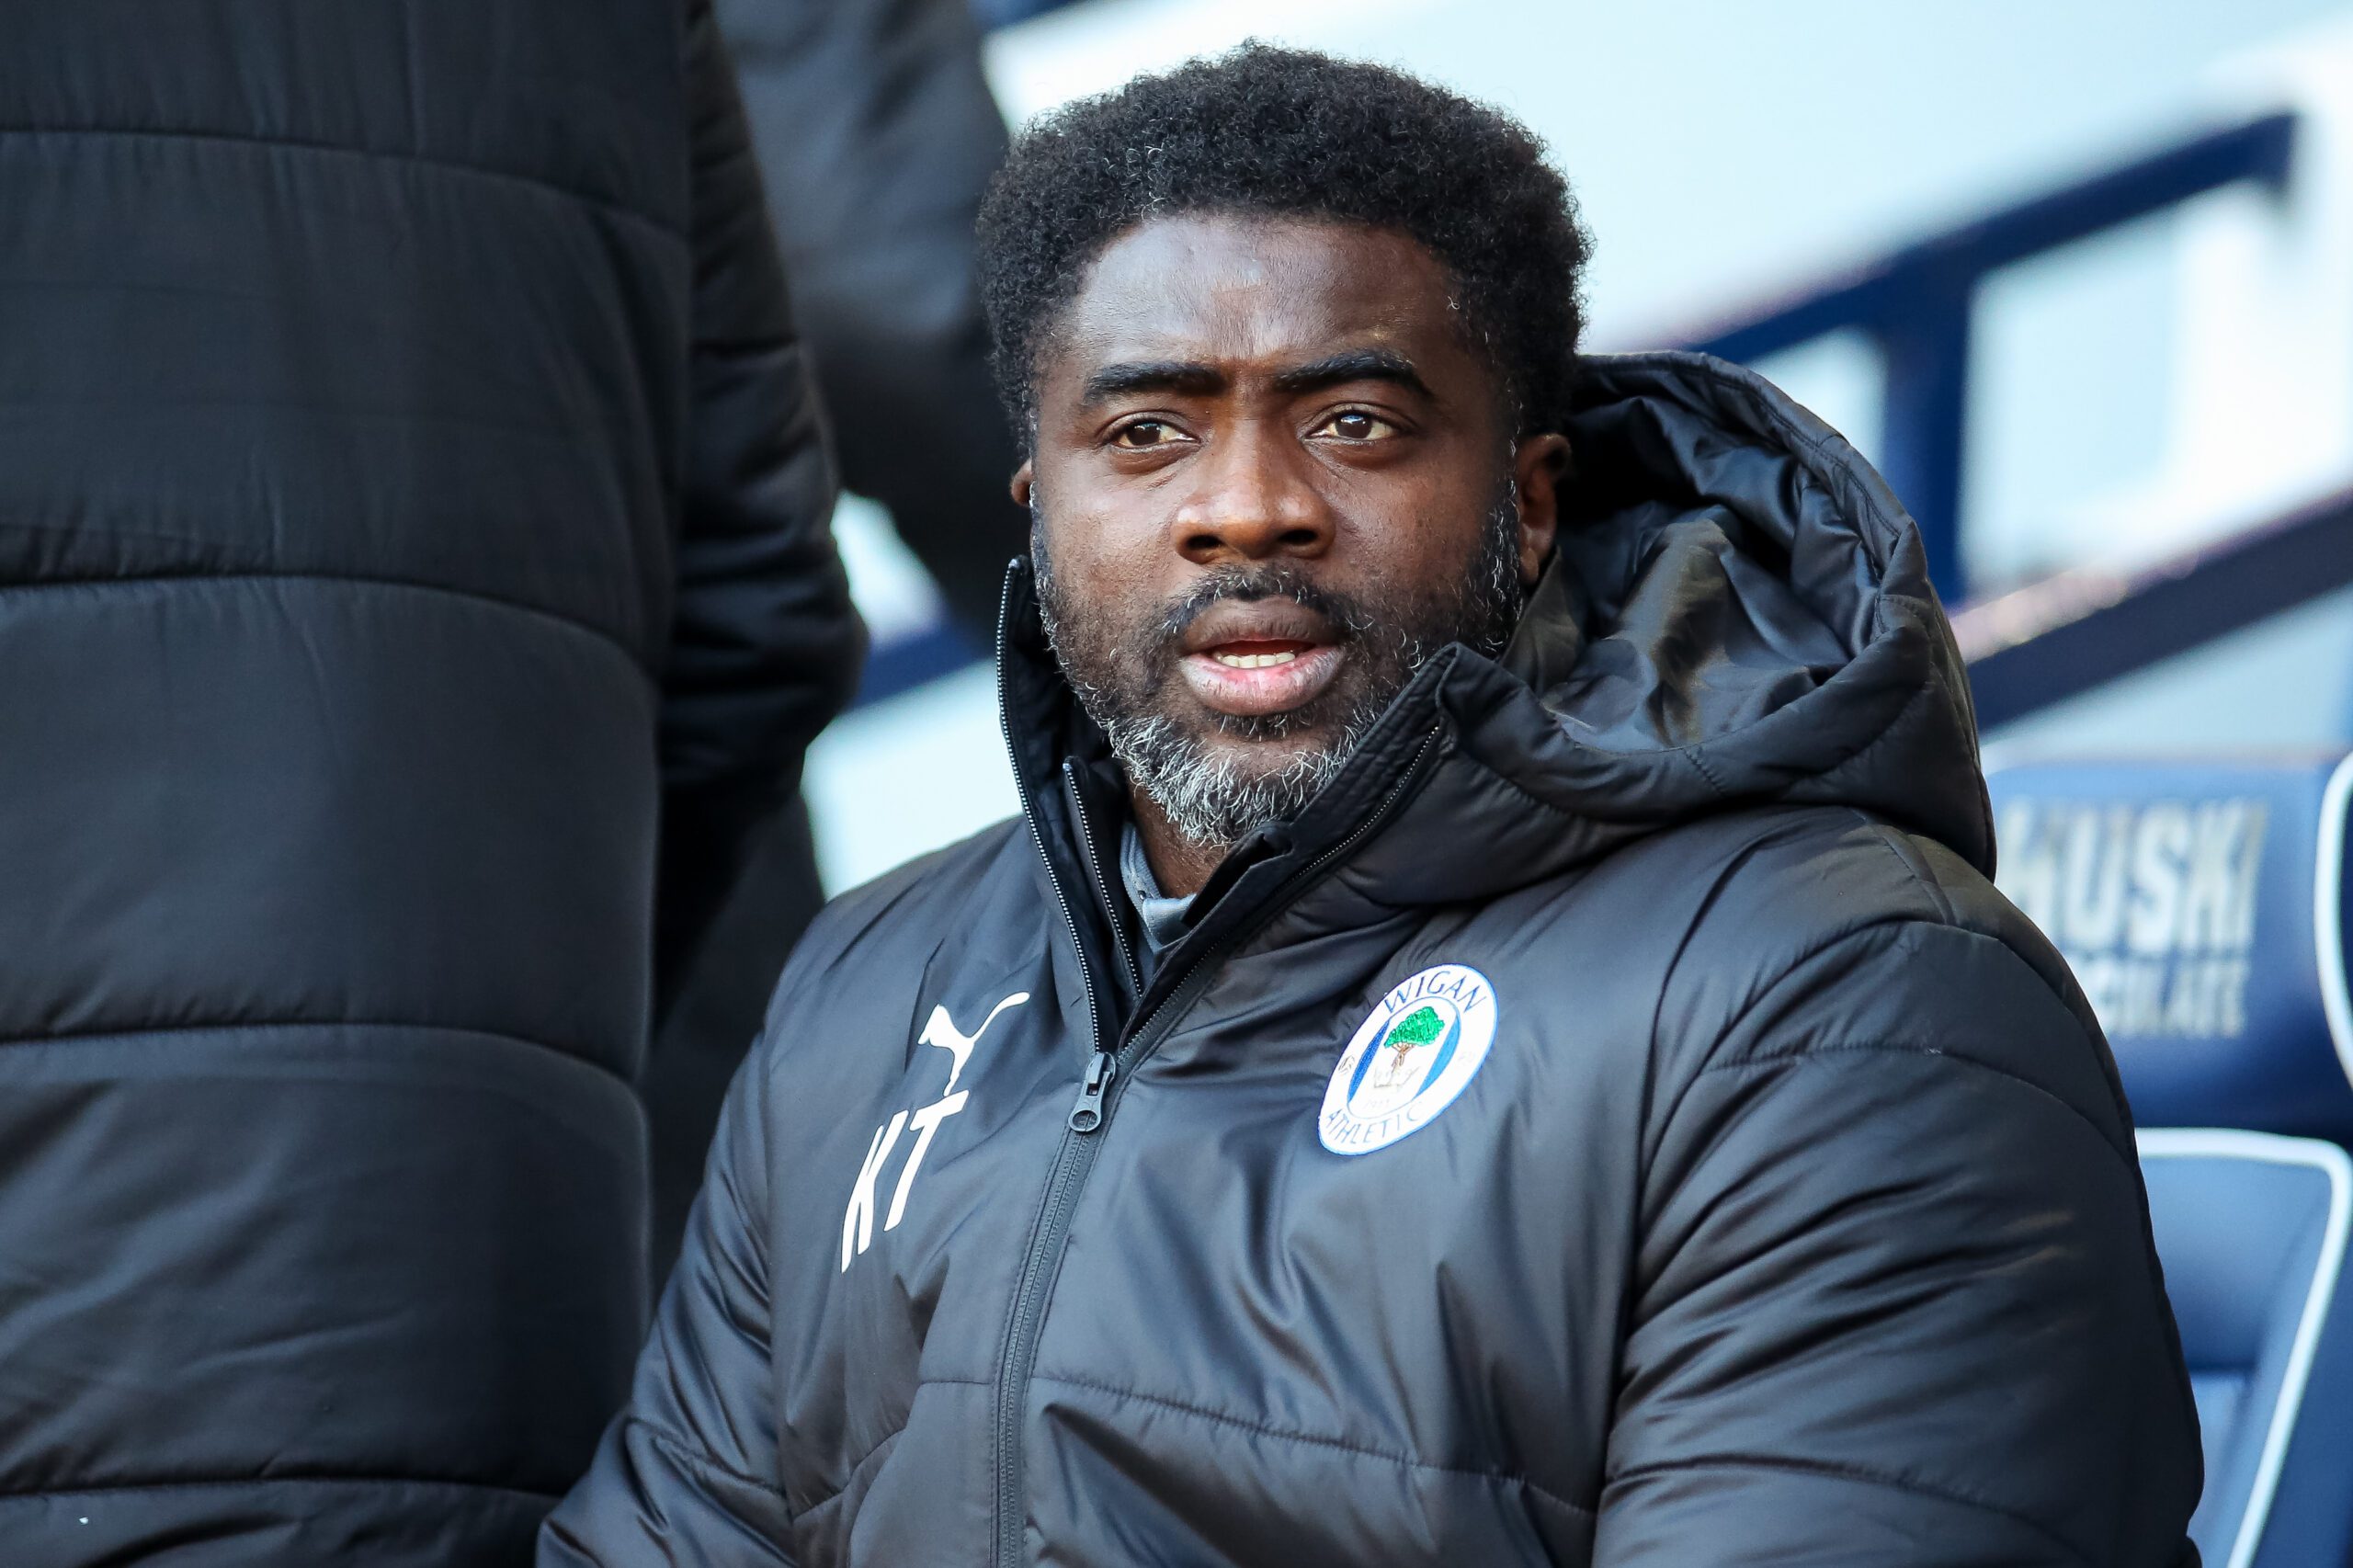 Kolo Toure proud of Wigan’s display at Millwall – South London News